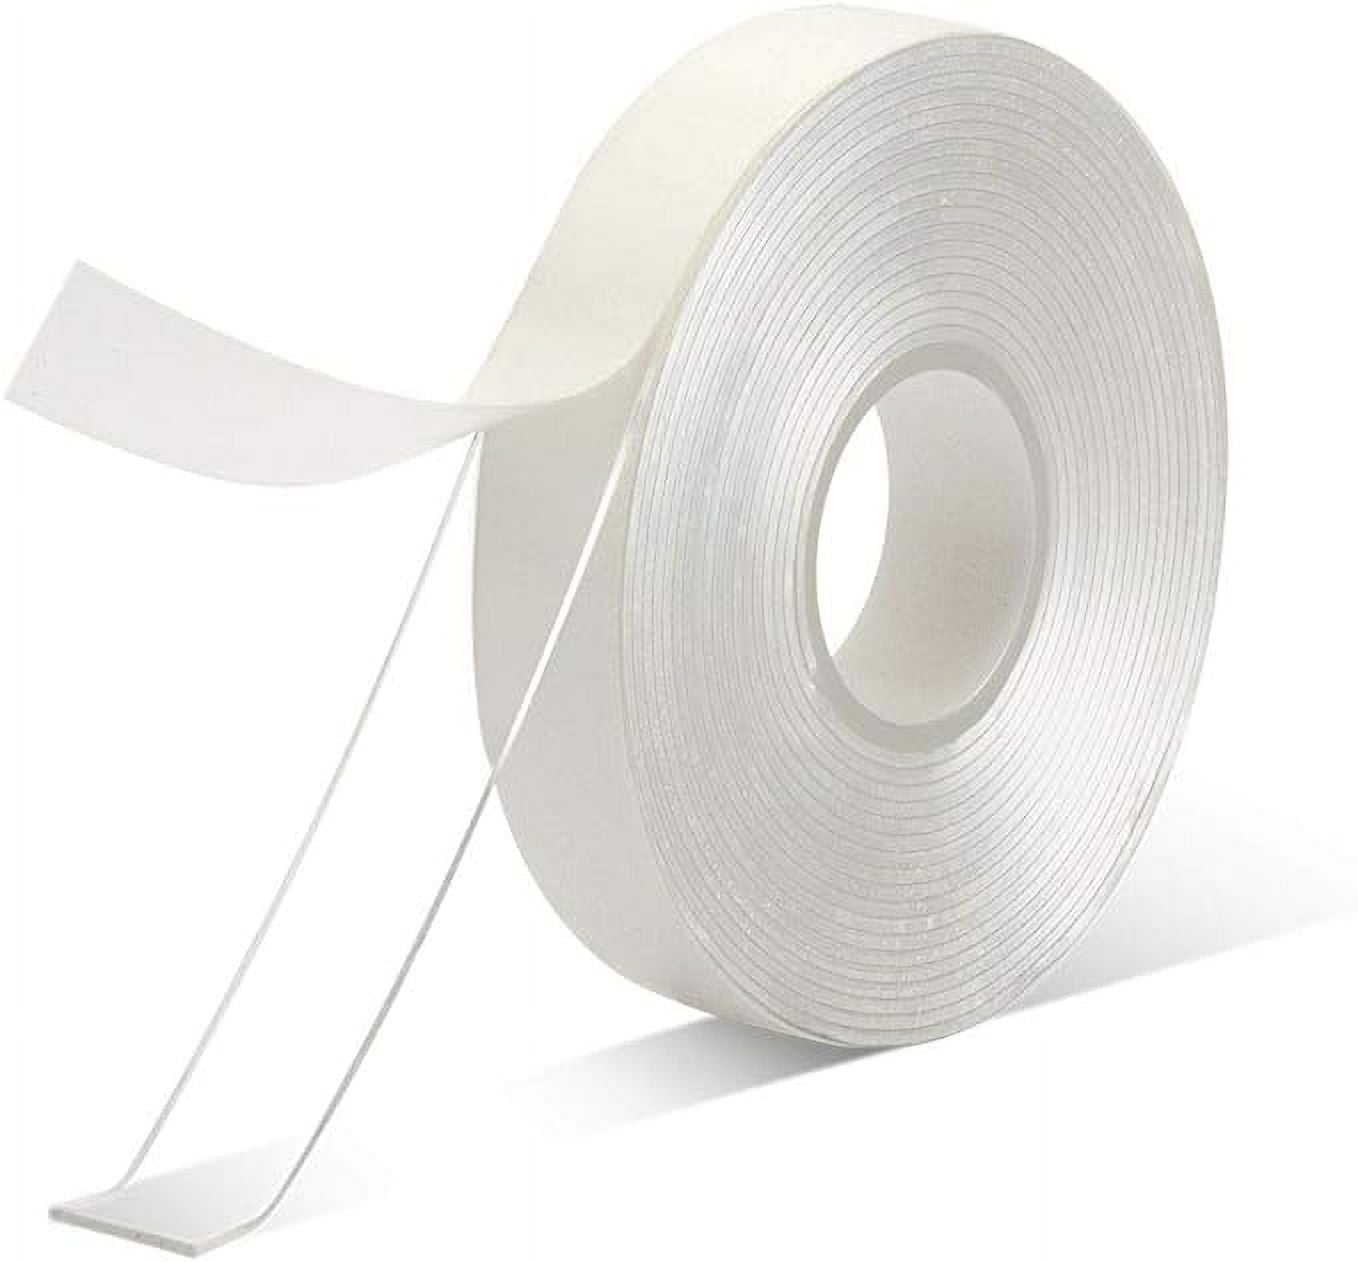 Drytac ReTac Duo Clear Double-Sided Mounting Adhesive (54 x 150' Roll, 1  mil)